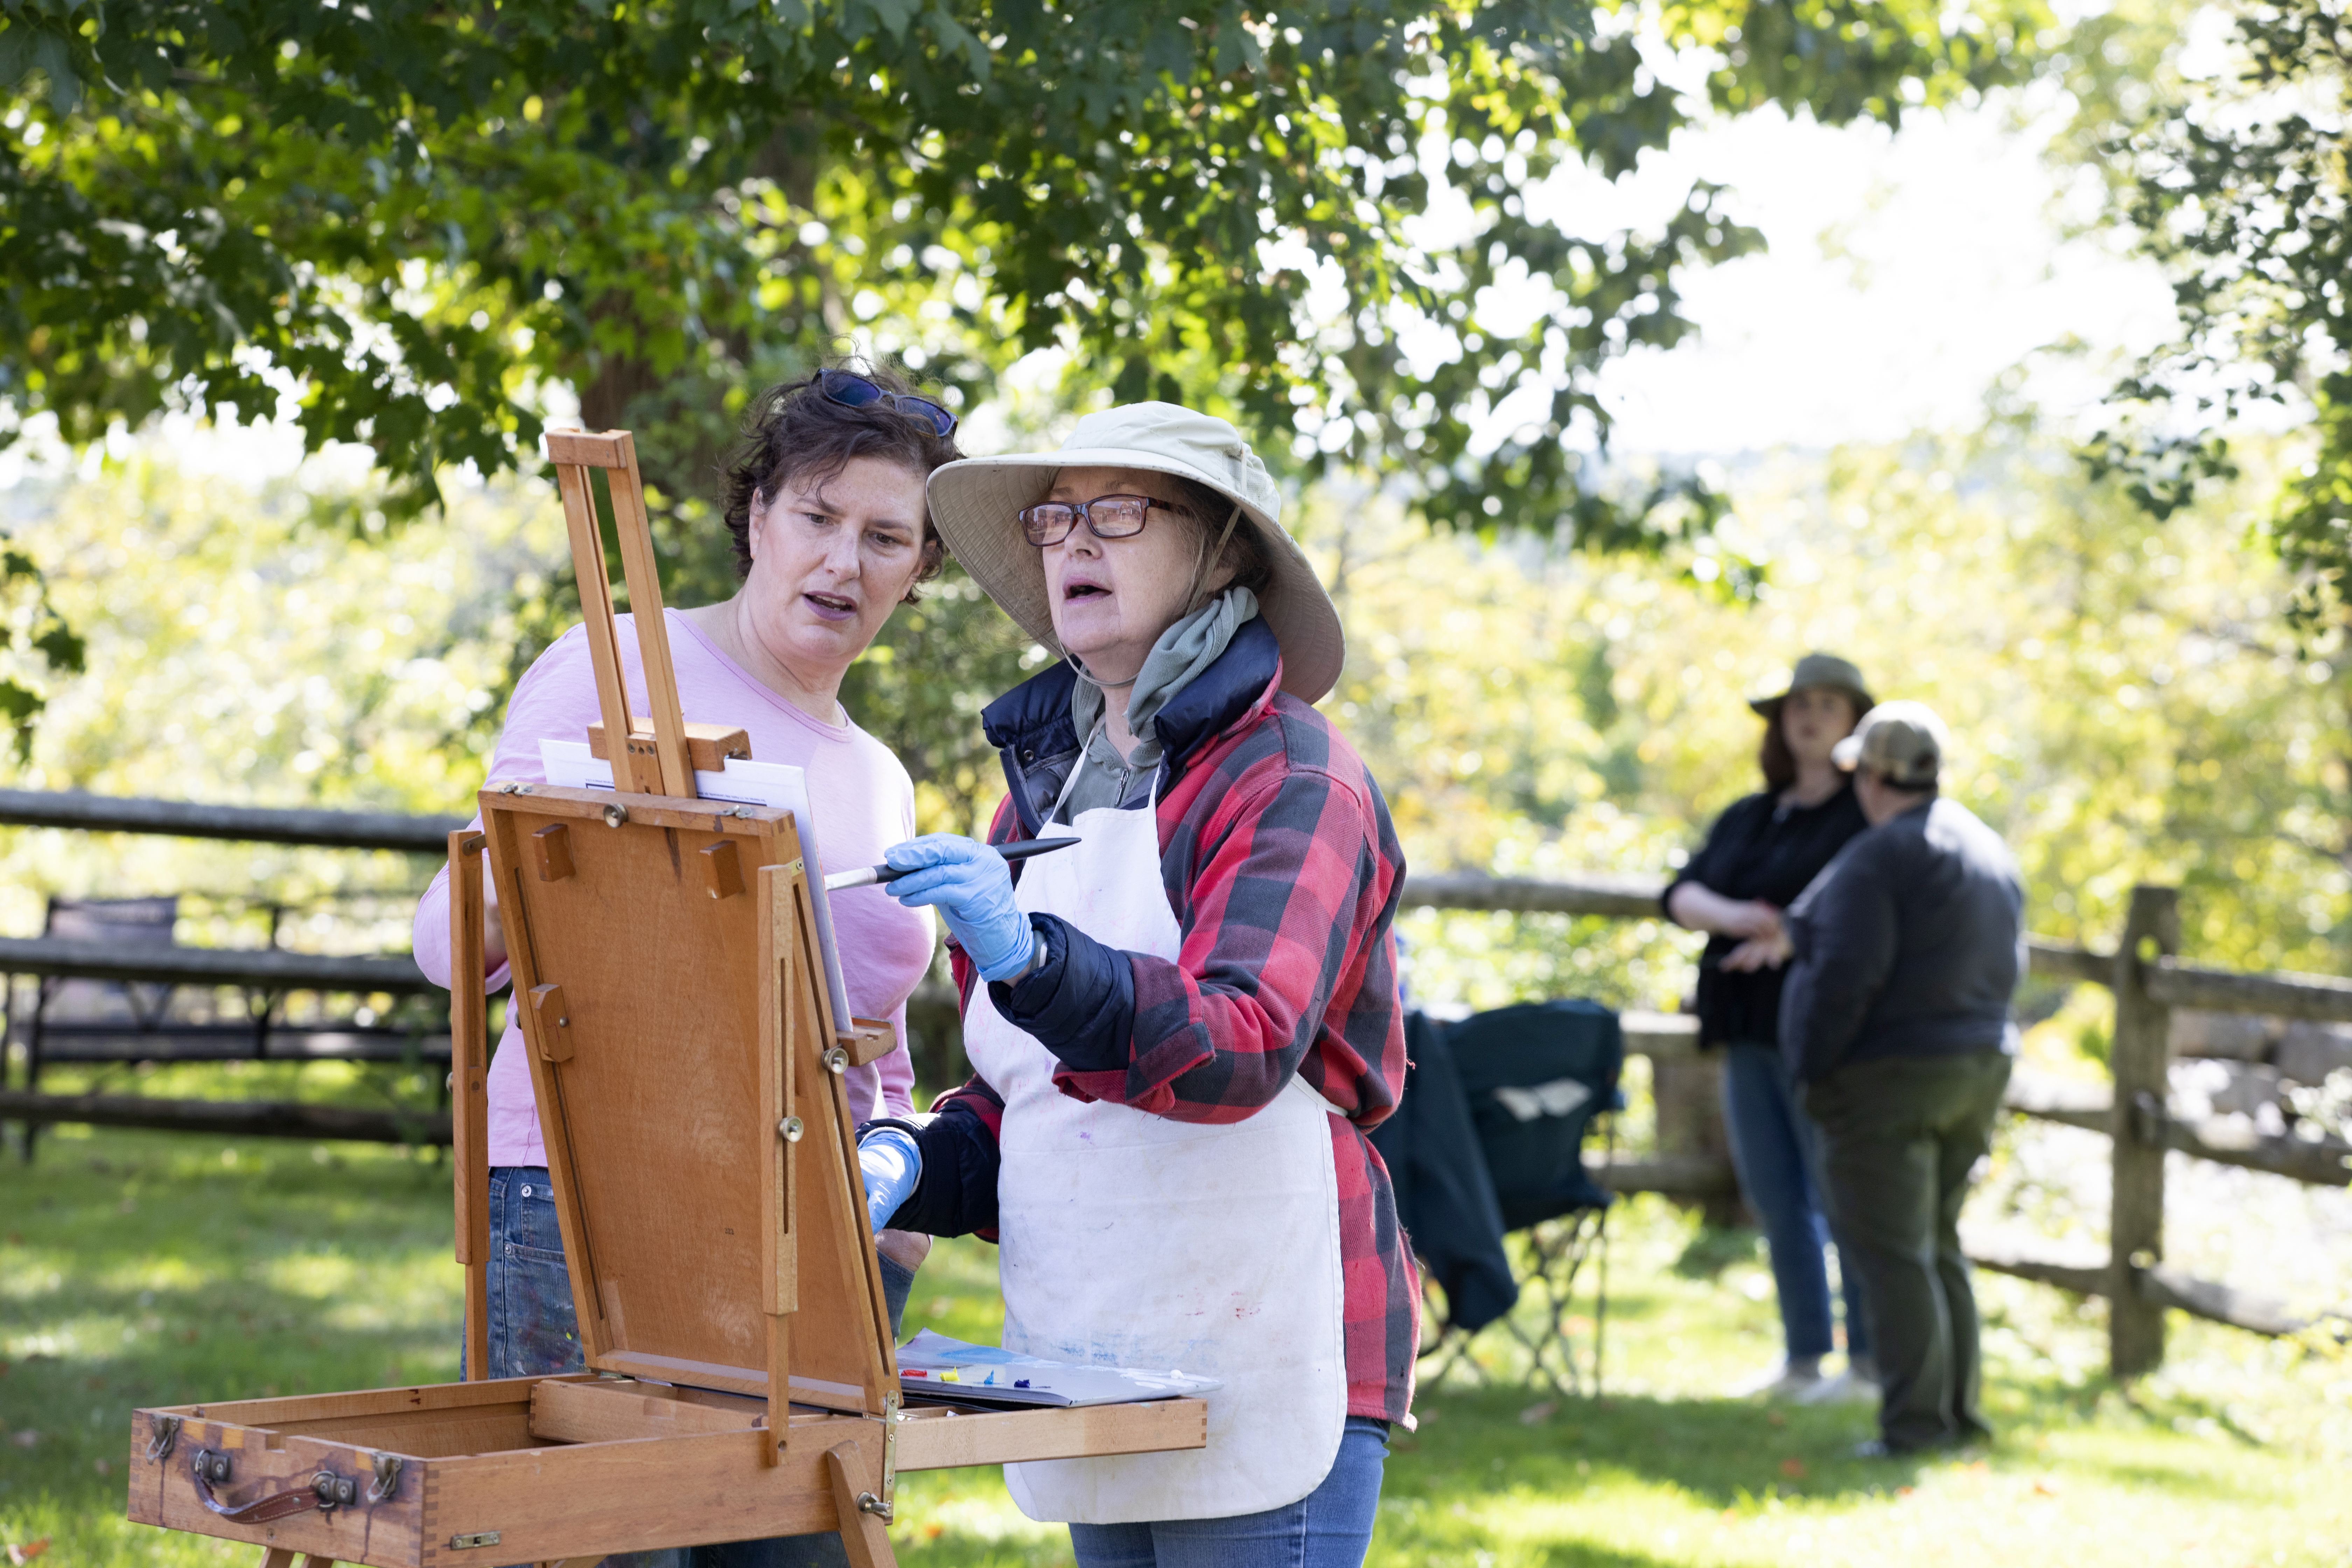 Art teacher Jessica Yurwitz, left, works with student Jane O'Maley of Rockport during an outdoor painting class at Cogswell's Grant in Essex. 